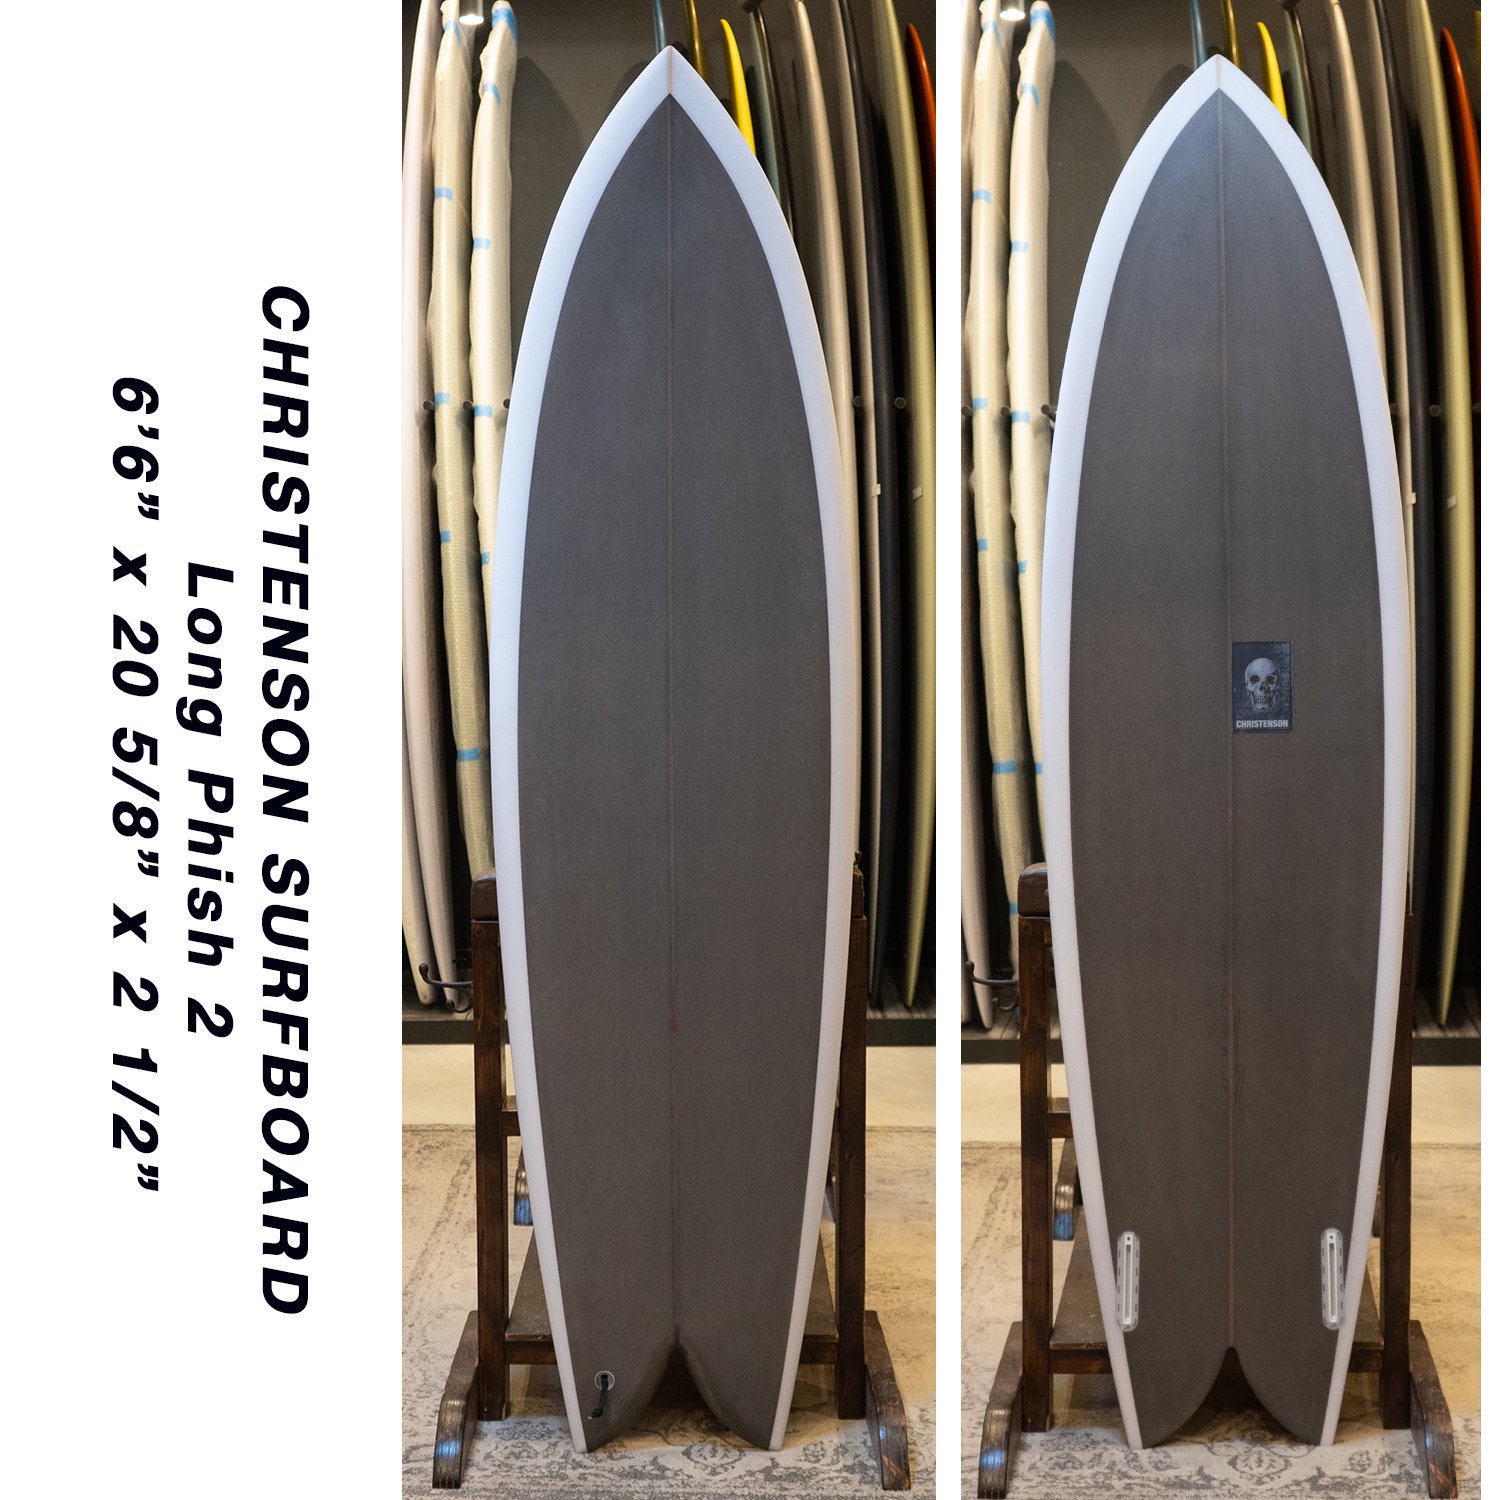 <img class='new_mark_img1' src='https://img.shop-pro.jp/img/new/icons14.gif' style='border:none;display:inline;margin:0px;padding:0px;width:auto;' />Christenson Surfboard / 6'6" Long Phish 